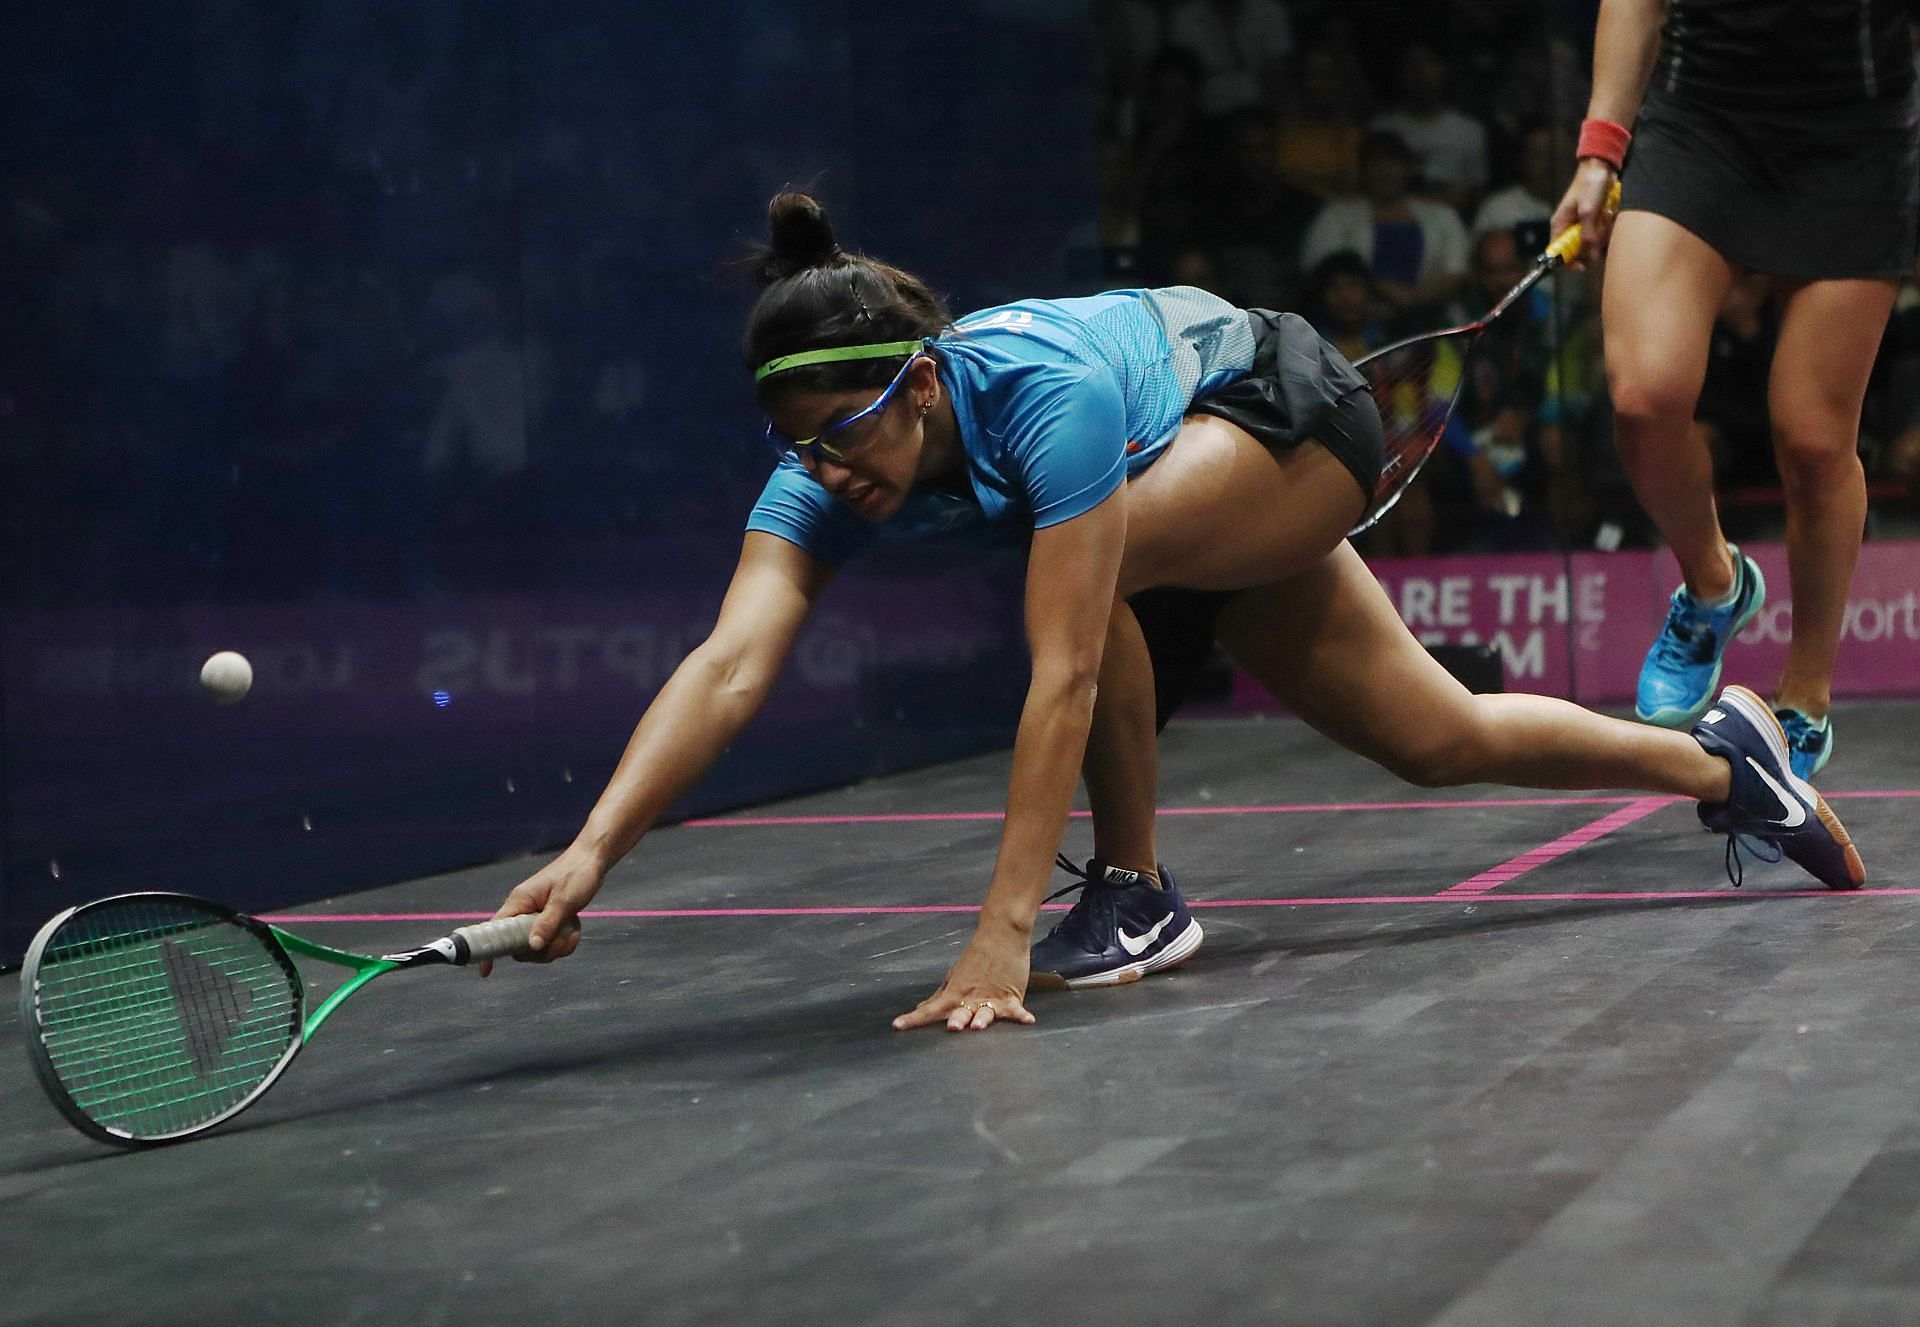 Indian squash ace &lt;a href=&#039;https://www.sportskeeda.com/player/joshna-chinappa/&#039; target=&#039;_blank&#039; rel=&#039;noopener noreferrer&#039;&gt;Joshna Chinappa&lt;/a&gt;. (PC: Getty Images)